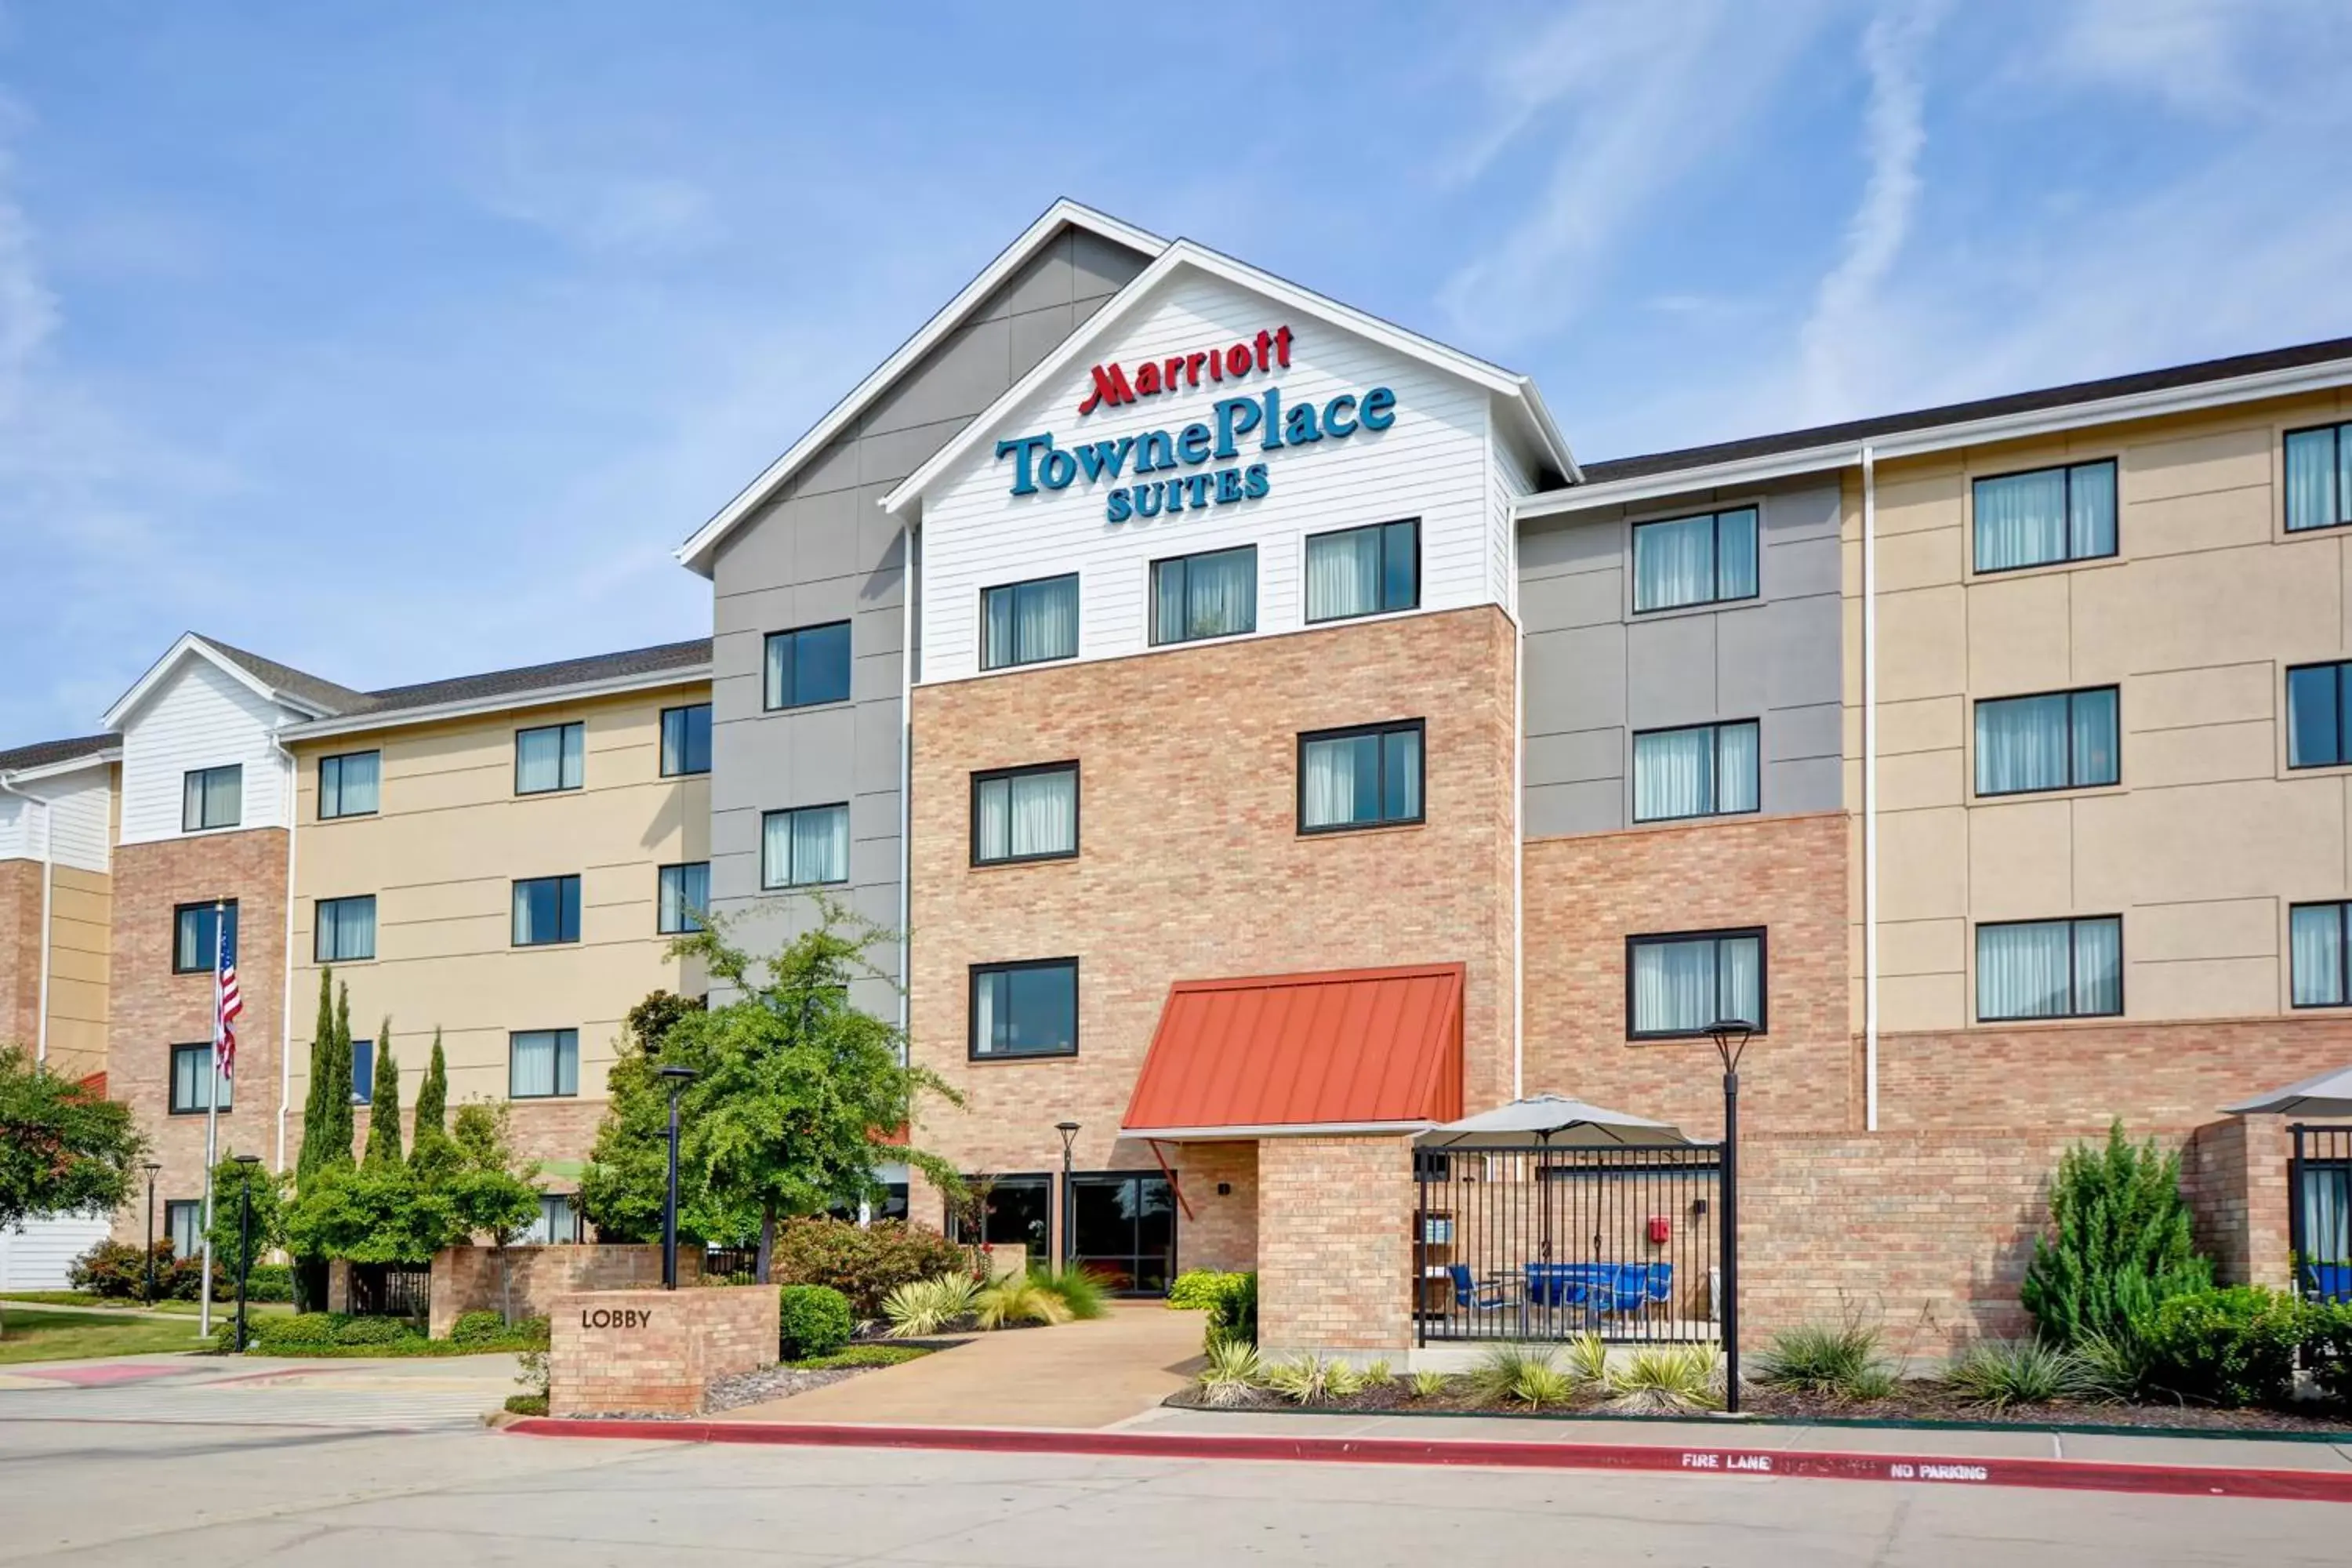 Property Building in TownePlace Suites Dallas/Lewisville